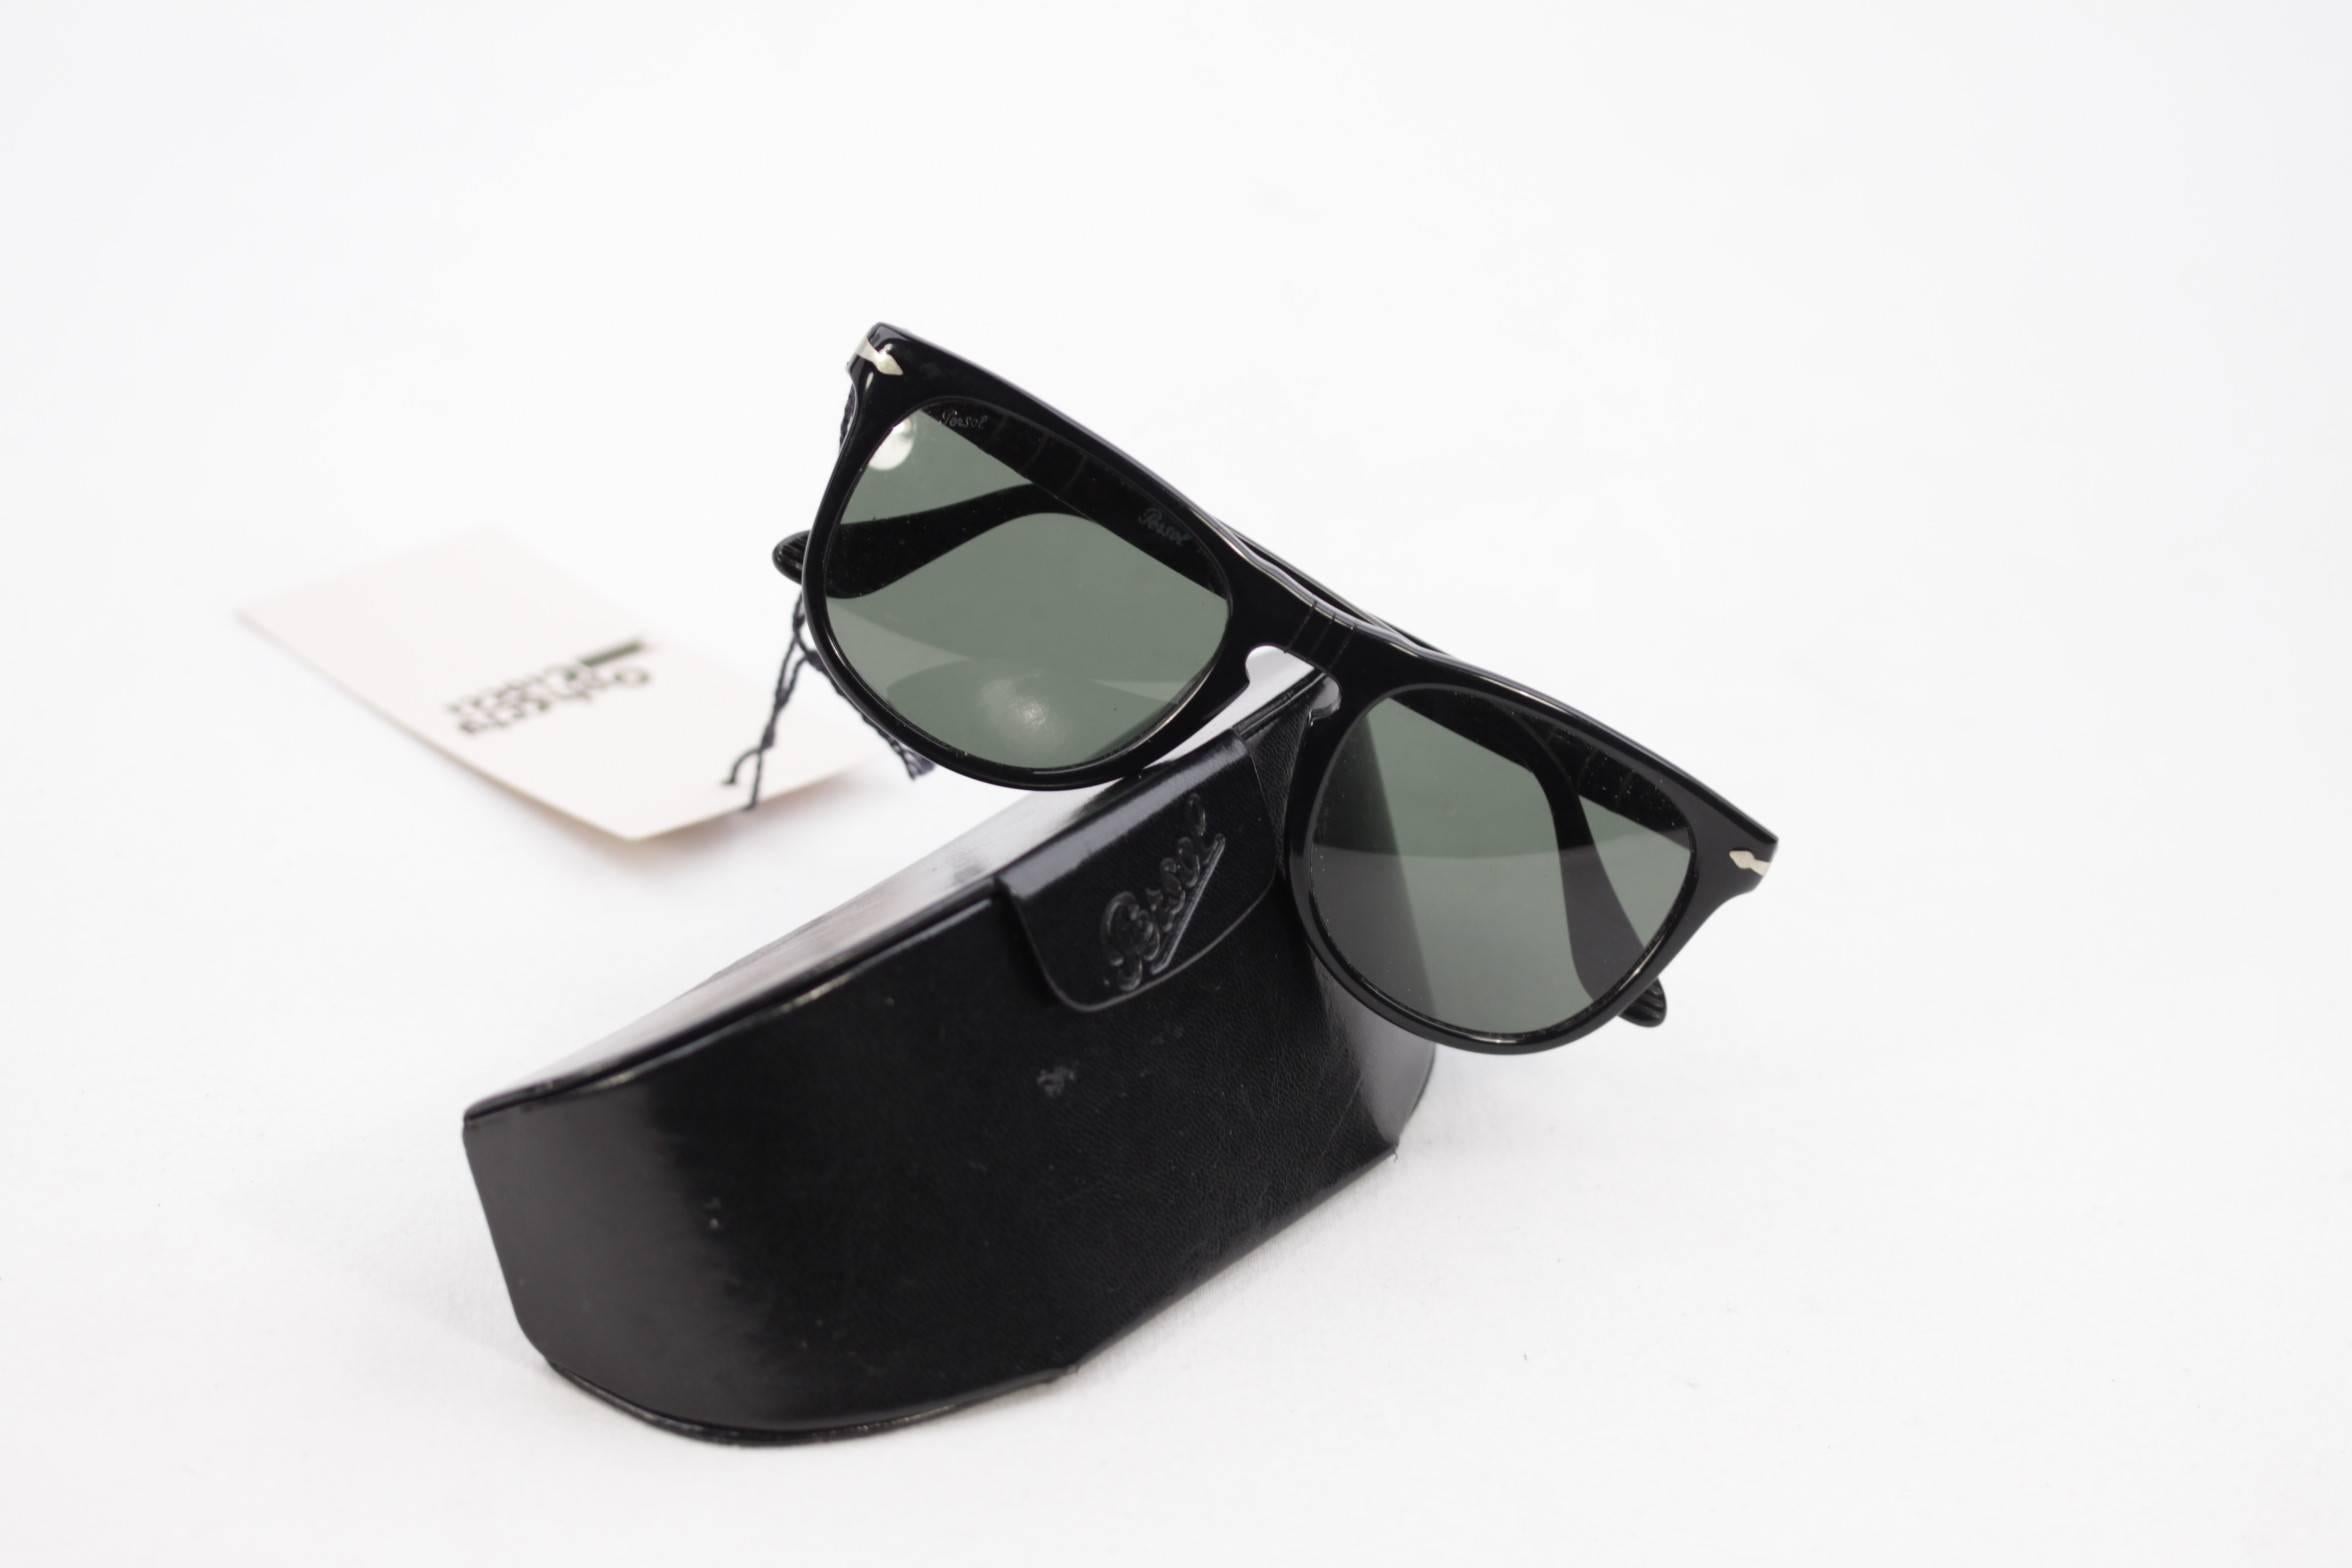 - Black frame
- Original 100% UV protection green lenses (PERSOL logo on right lens)
- Flexible temple (thanks to MEFLECTO System)
- Comes with a PERSOL case (with some scartches and wear of use)

Any other detail which is not mentioned may be